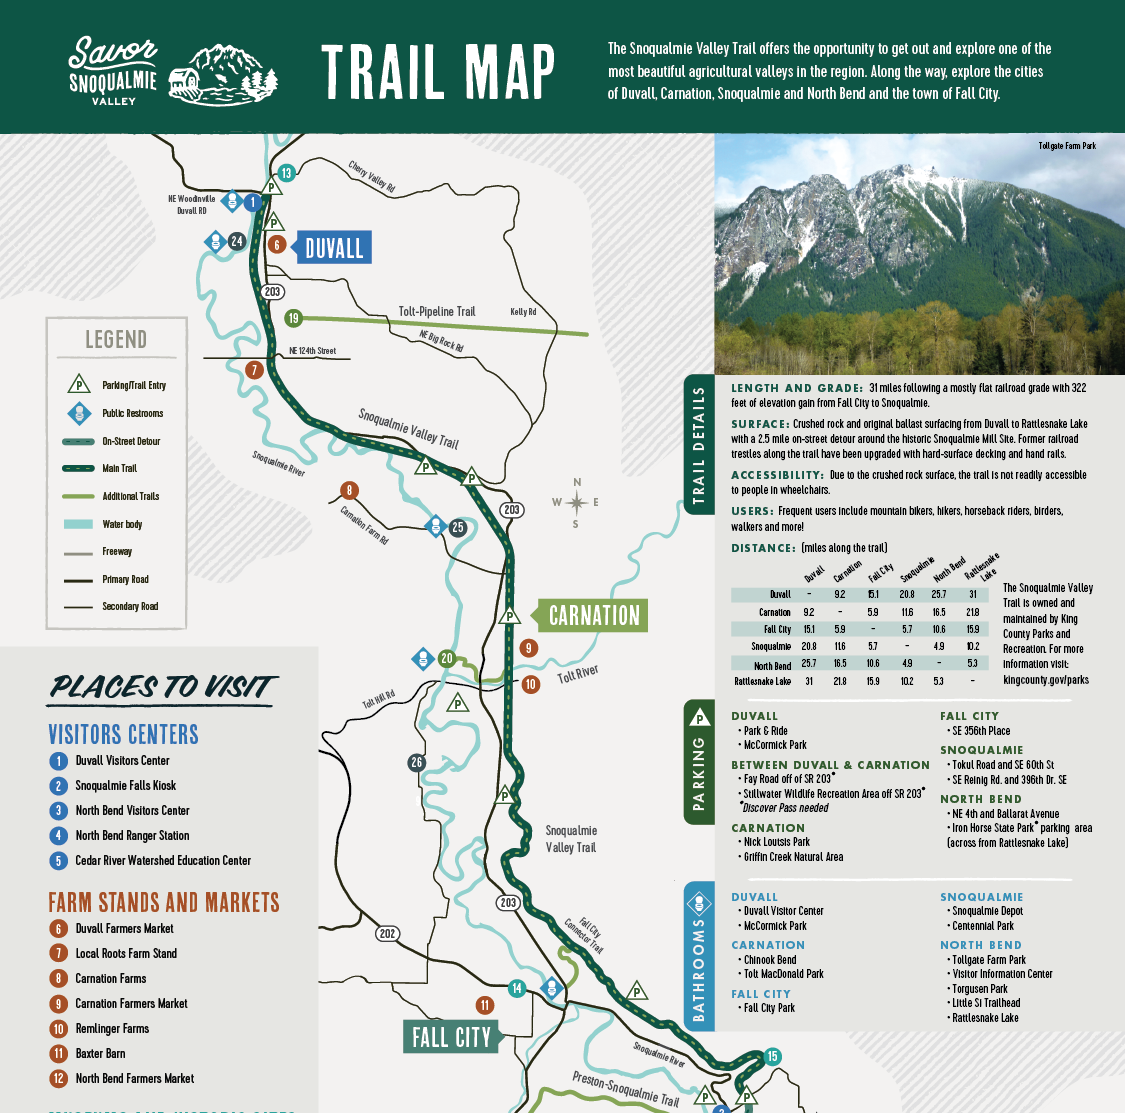 Savor-Snoqualmie-Valley-Trail-Map-preview-Kat-Marshell-2018.png